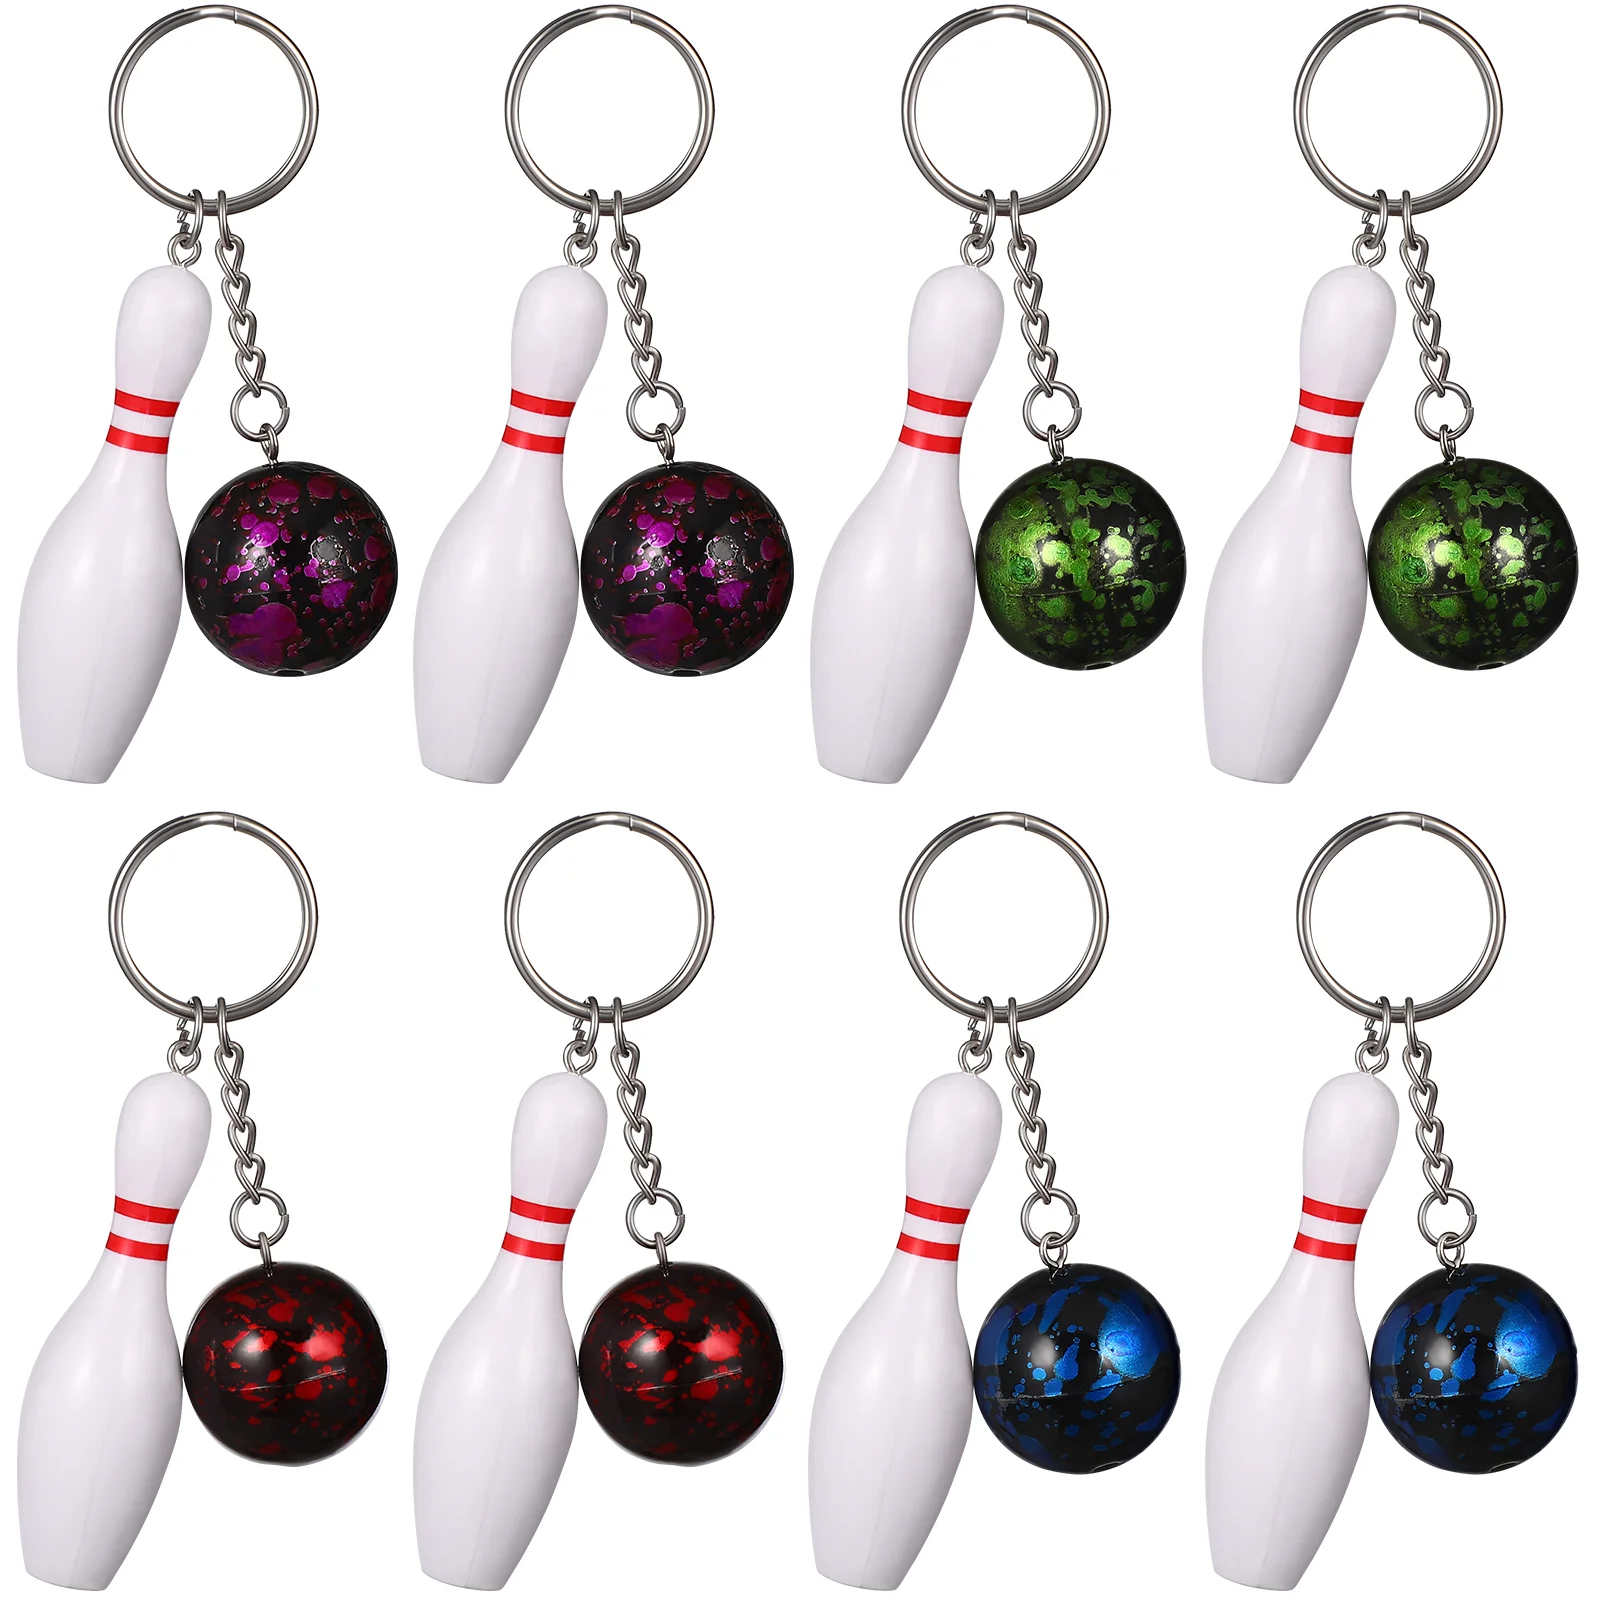 

10 Pcs Bowling Keychains Sport Style Bowling Ball and Pin Pendant Keyrings Bowling Party Favors Souvenir Gifts Accessories